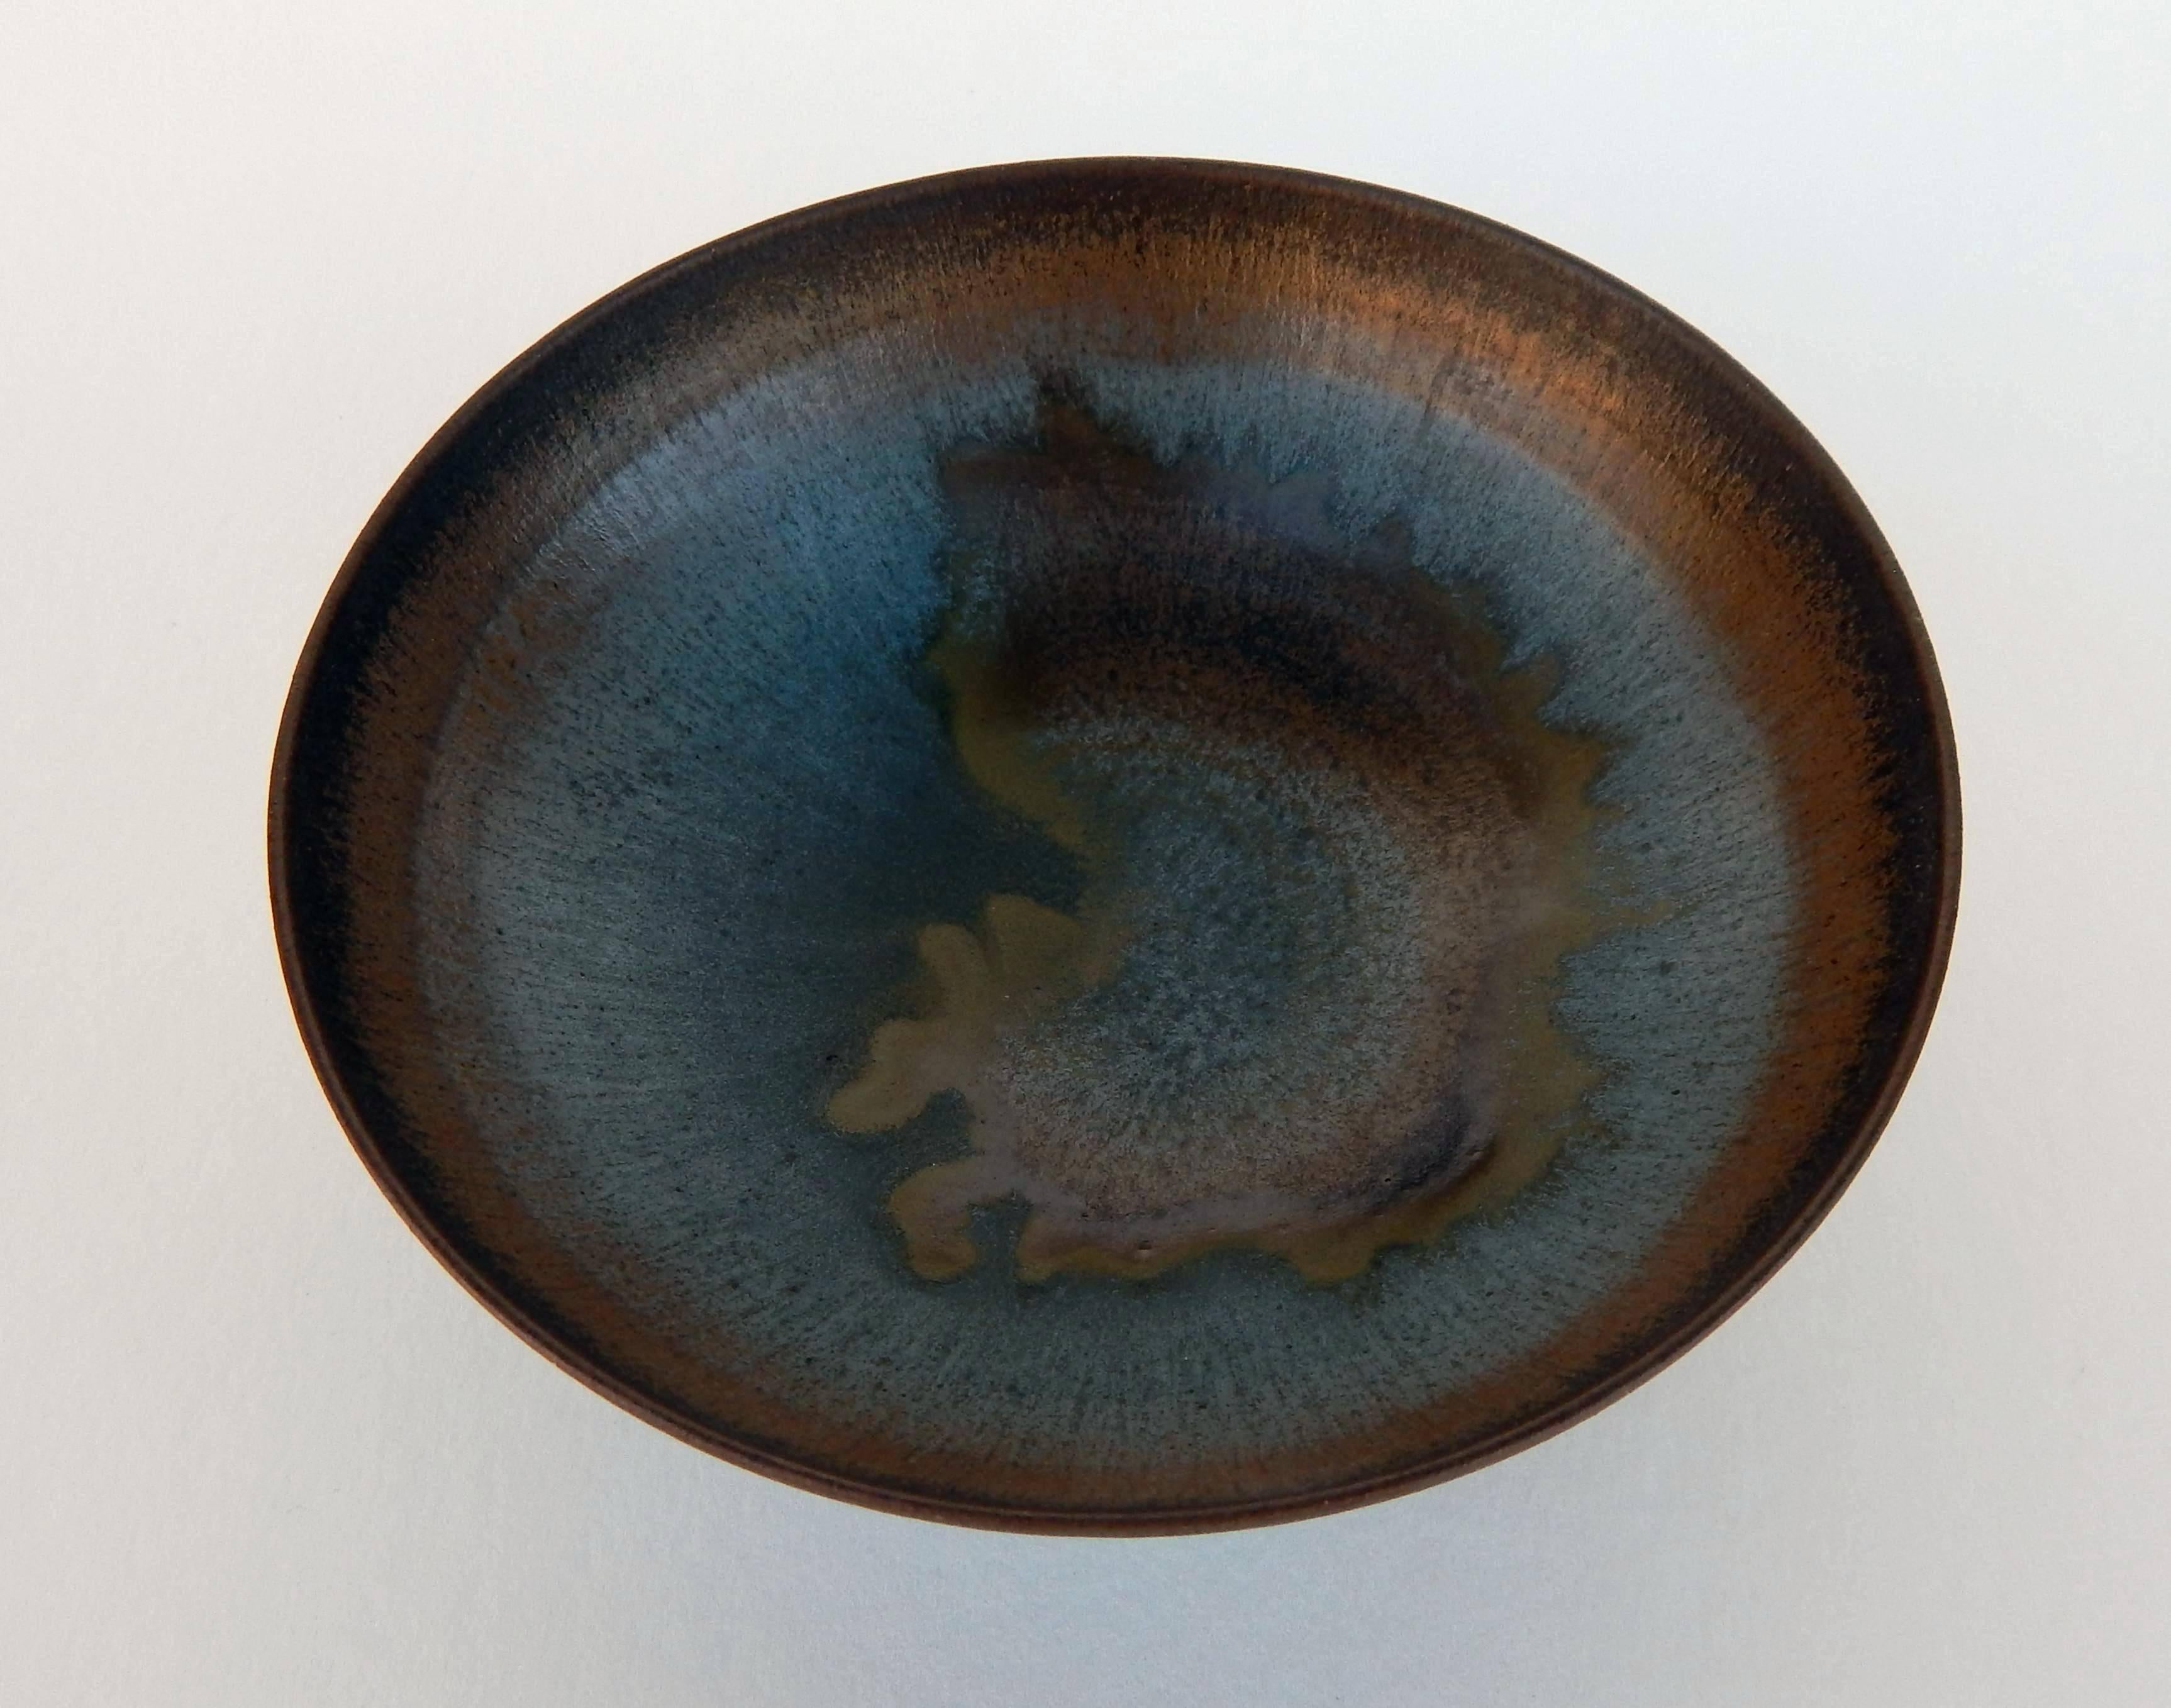 Mid-Century Modern Studio Pottery bowl by the Natzlers.
Beautiful piece in mint condition measures 1.5